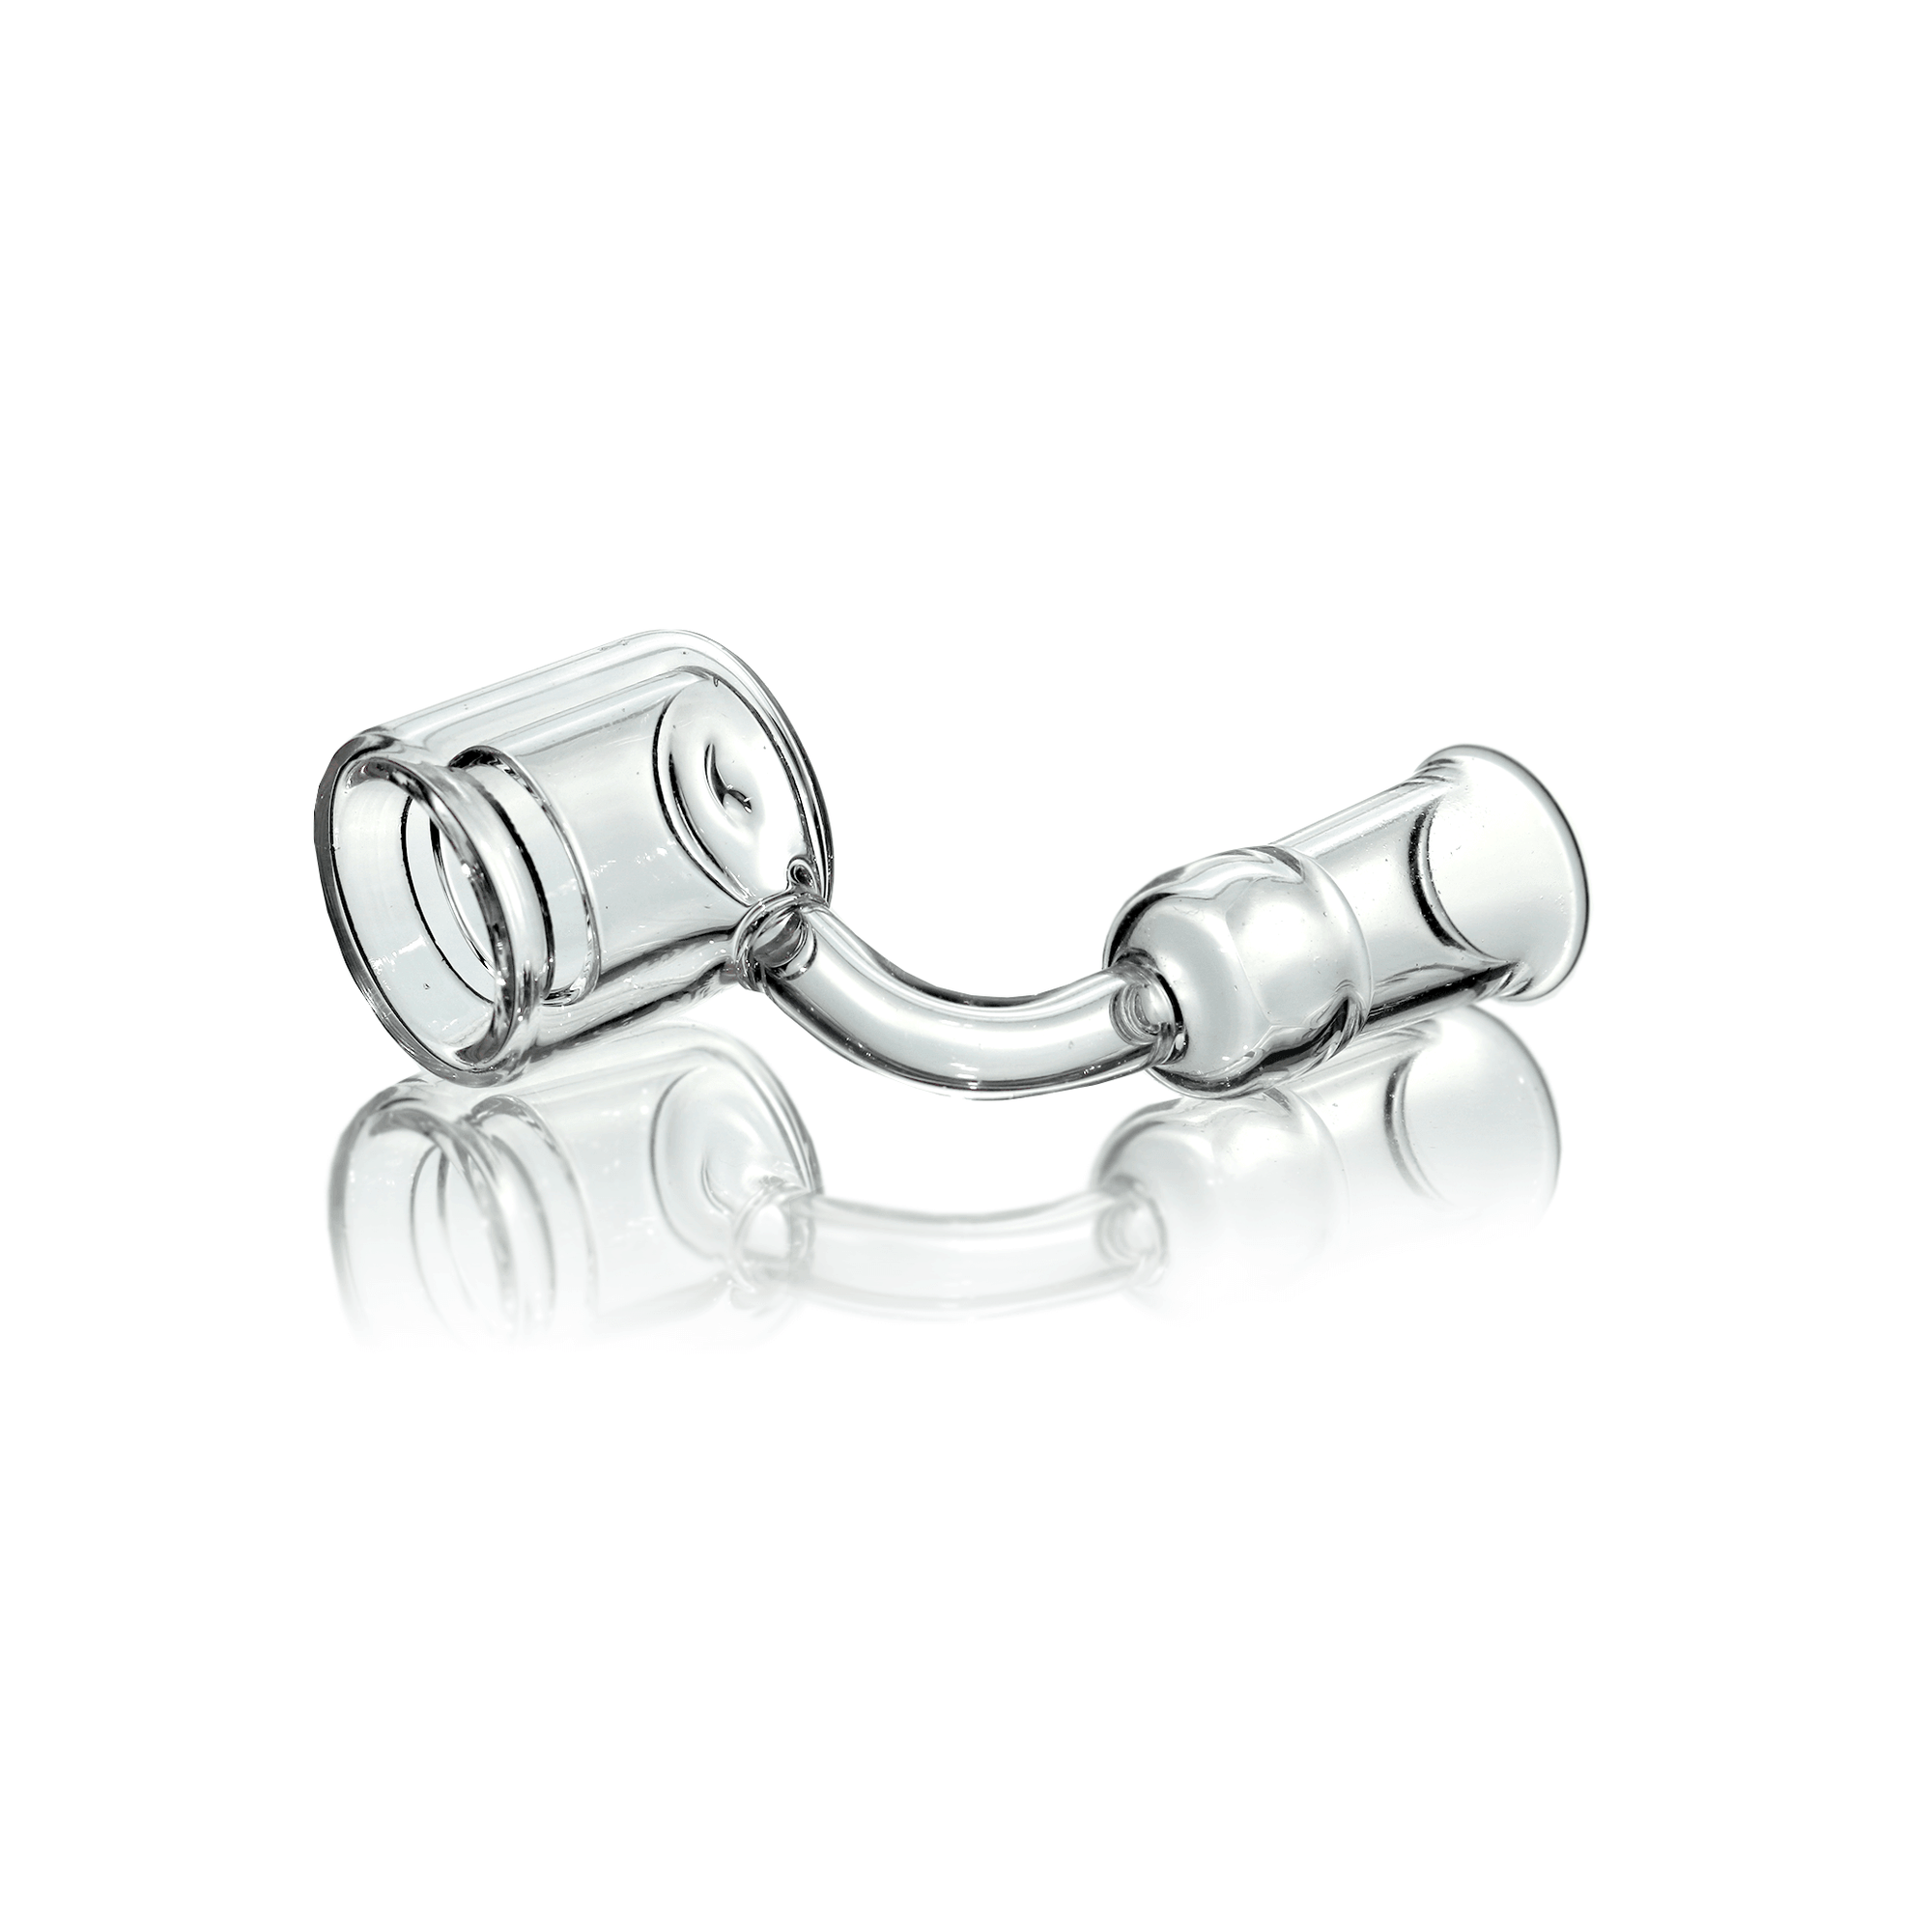 Quartz Double Wall Banger (Torch) | 14mm Female | the dabbing specialists